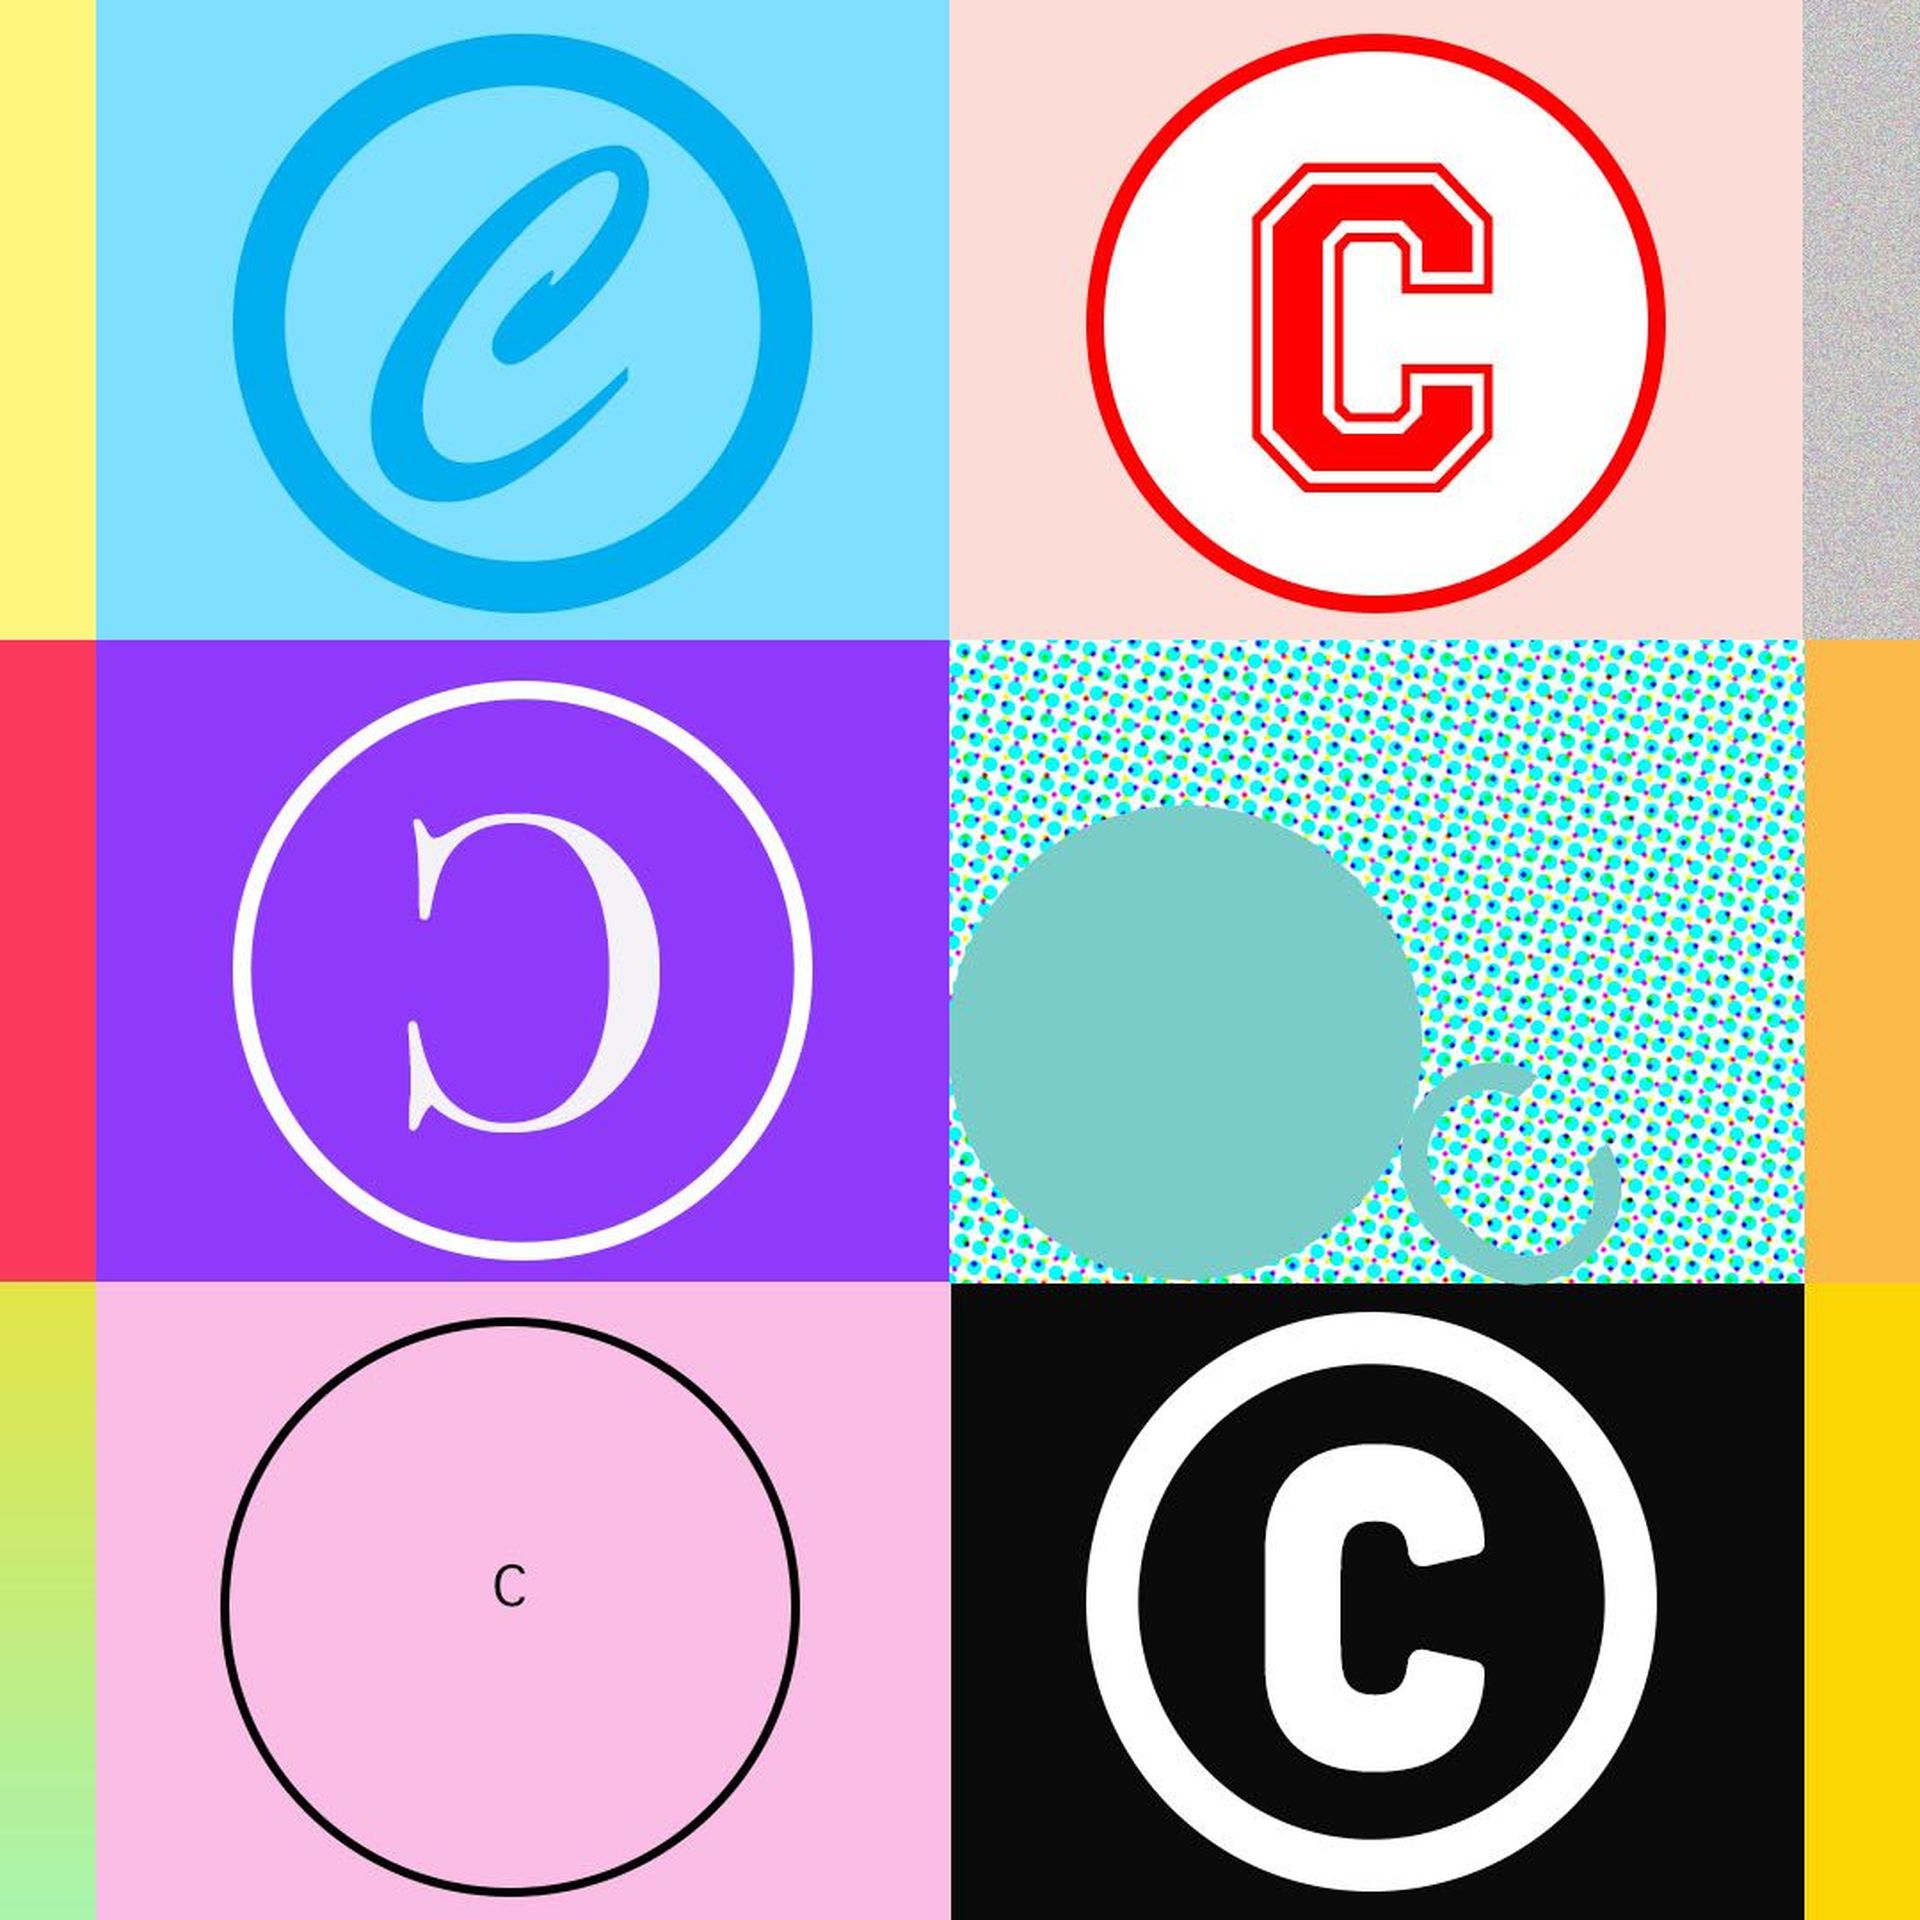 Illustration of copyright symbols in different styles and colors